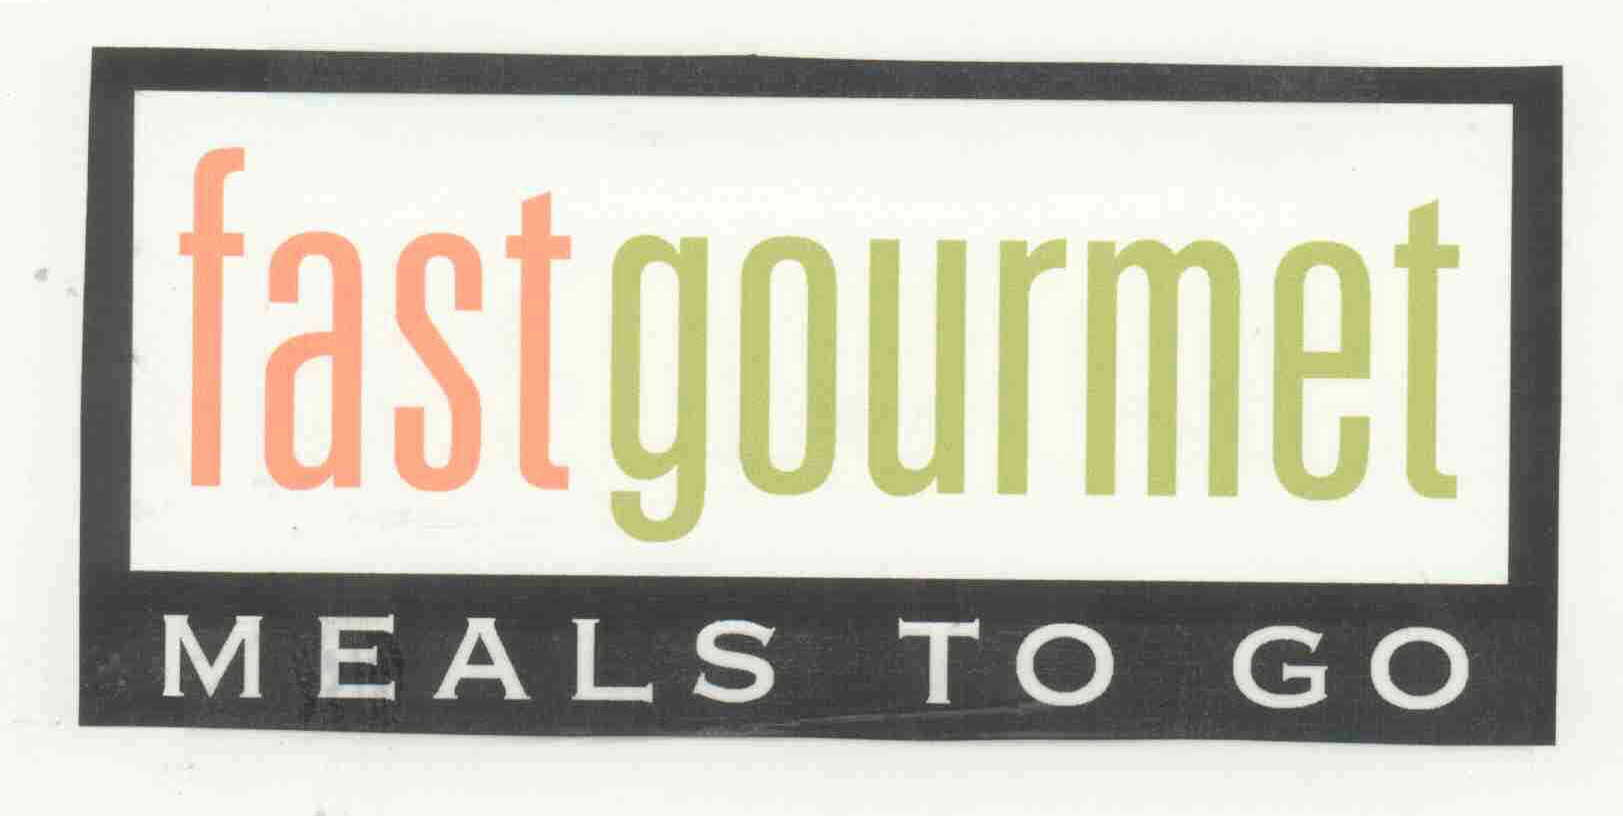  FAST GOURMET MEALS TO GO